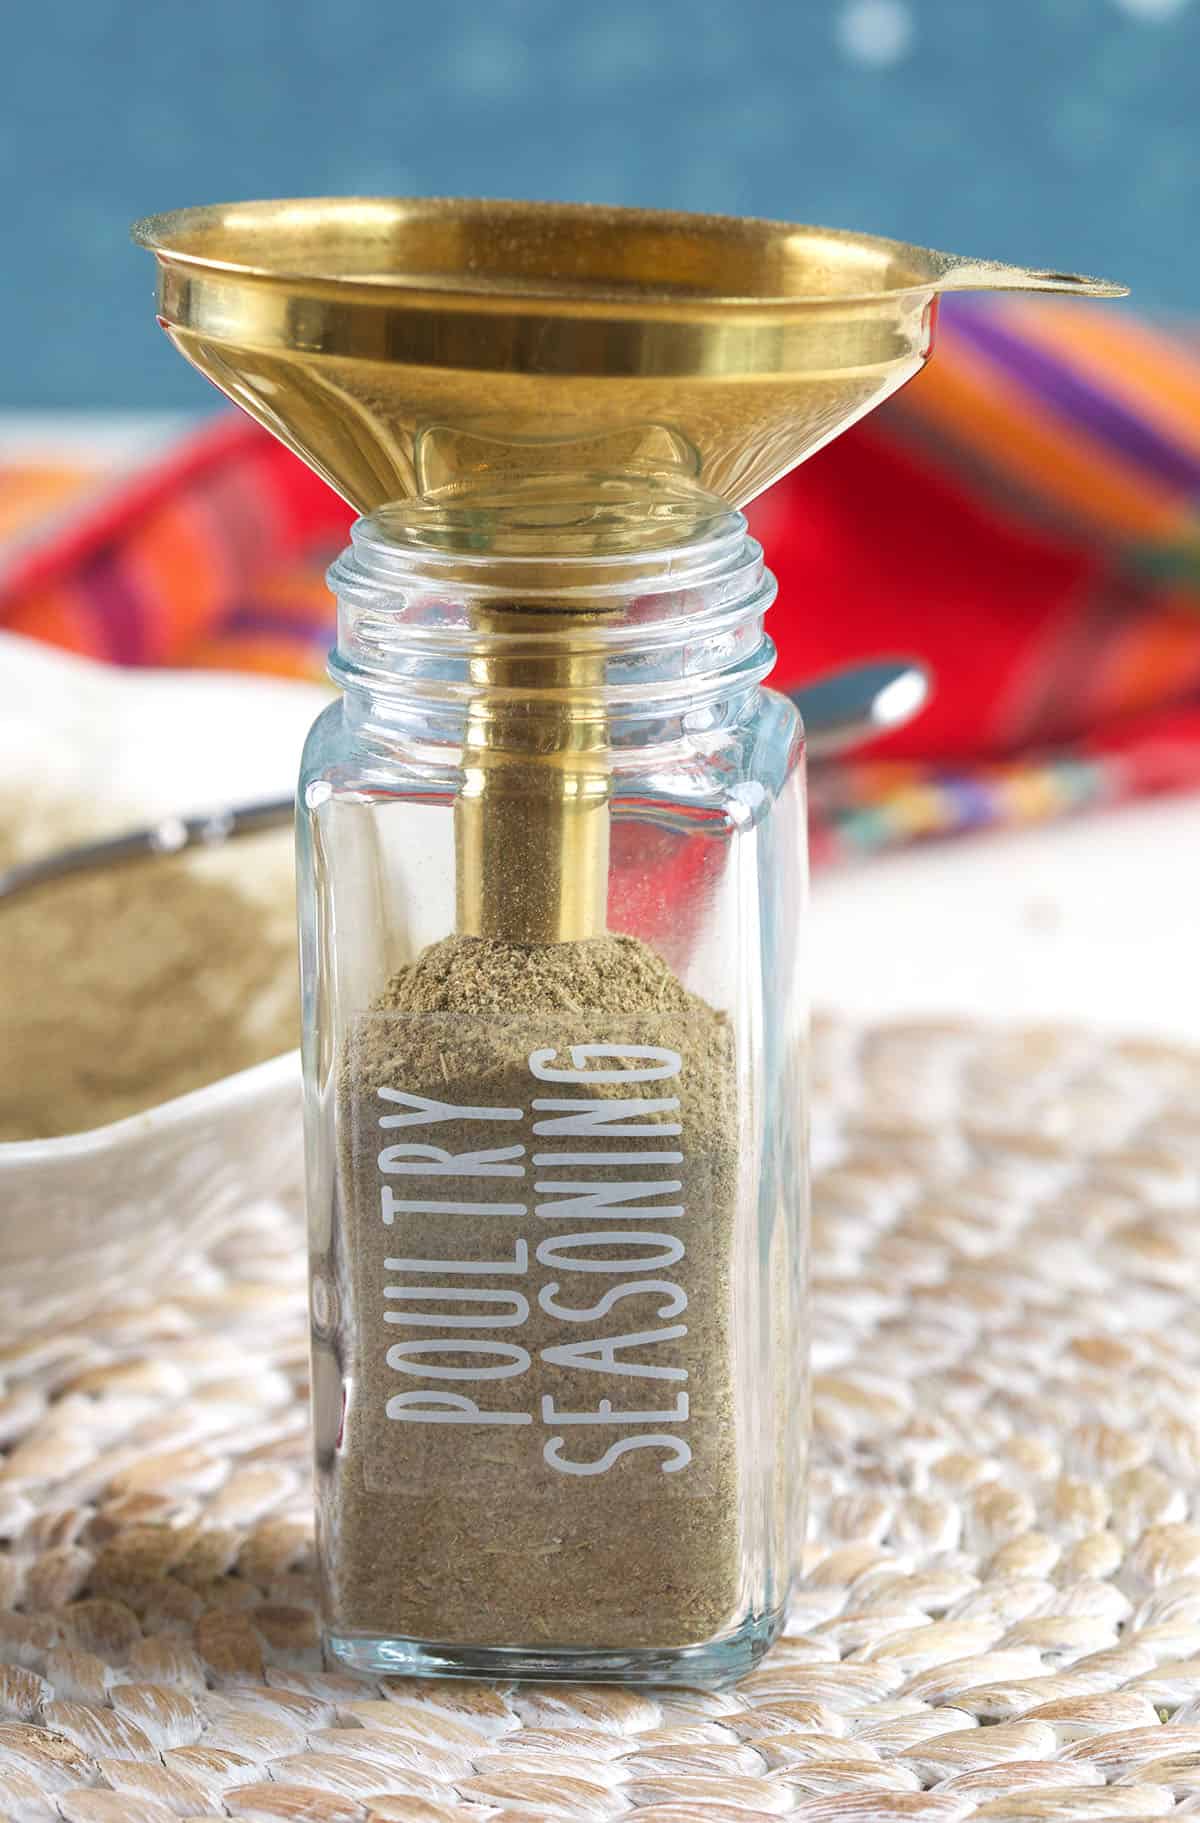 A small funnel is placed on top of a spice jar. 